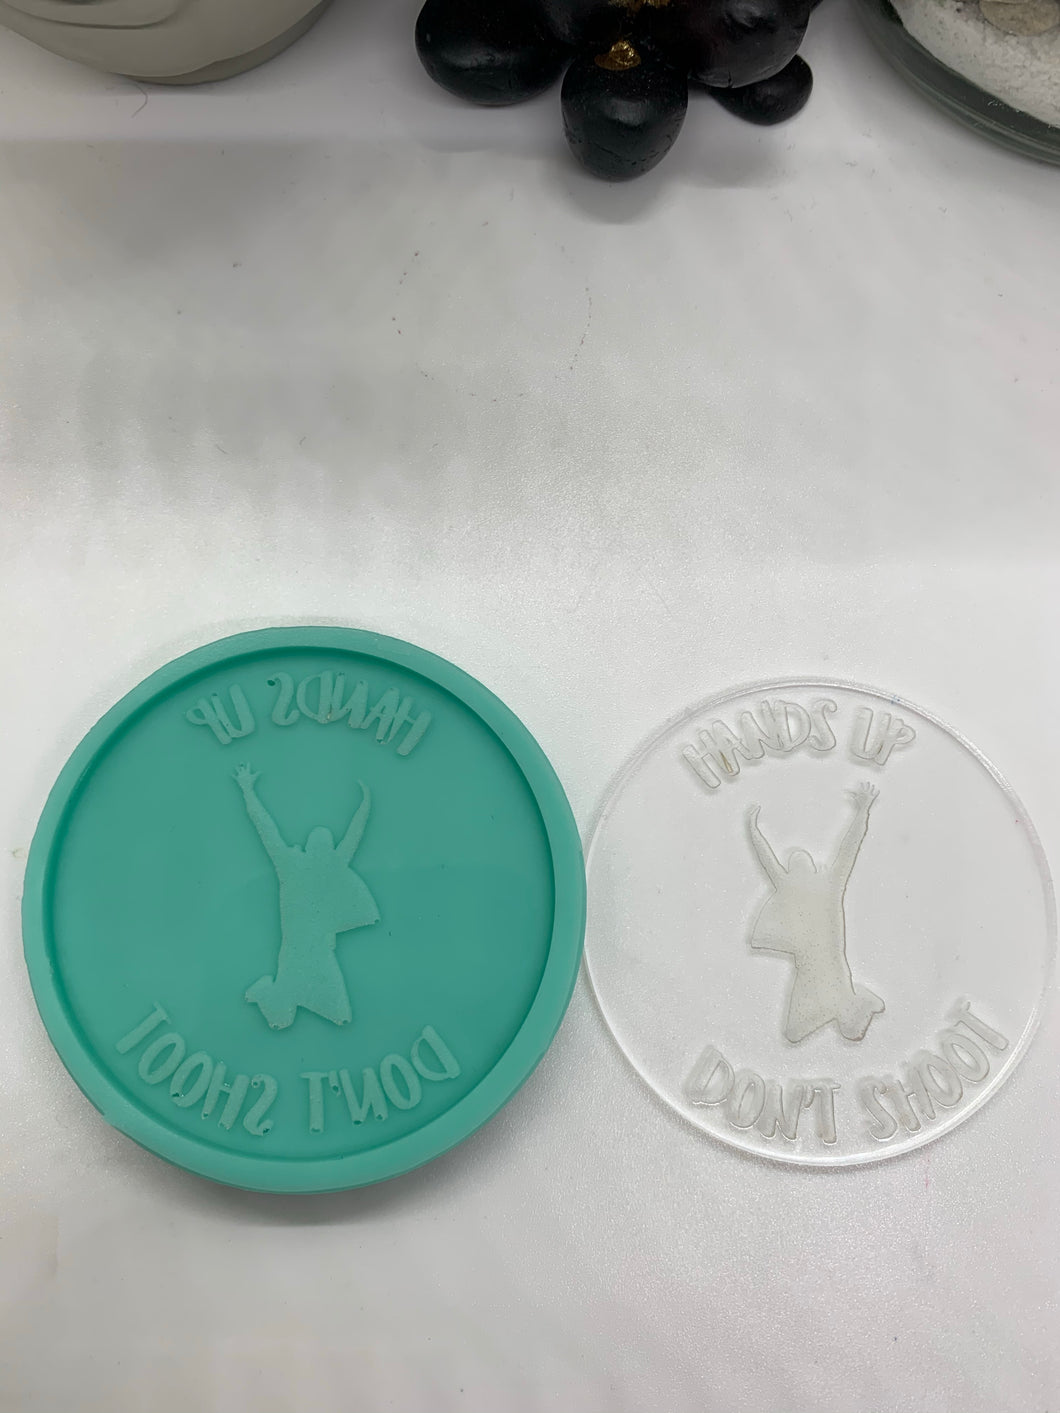 Hands Up Don’t Shoot Silicone Mold